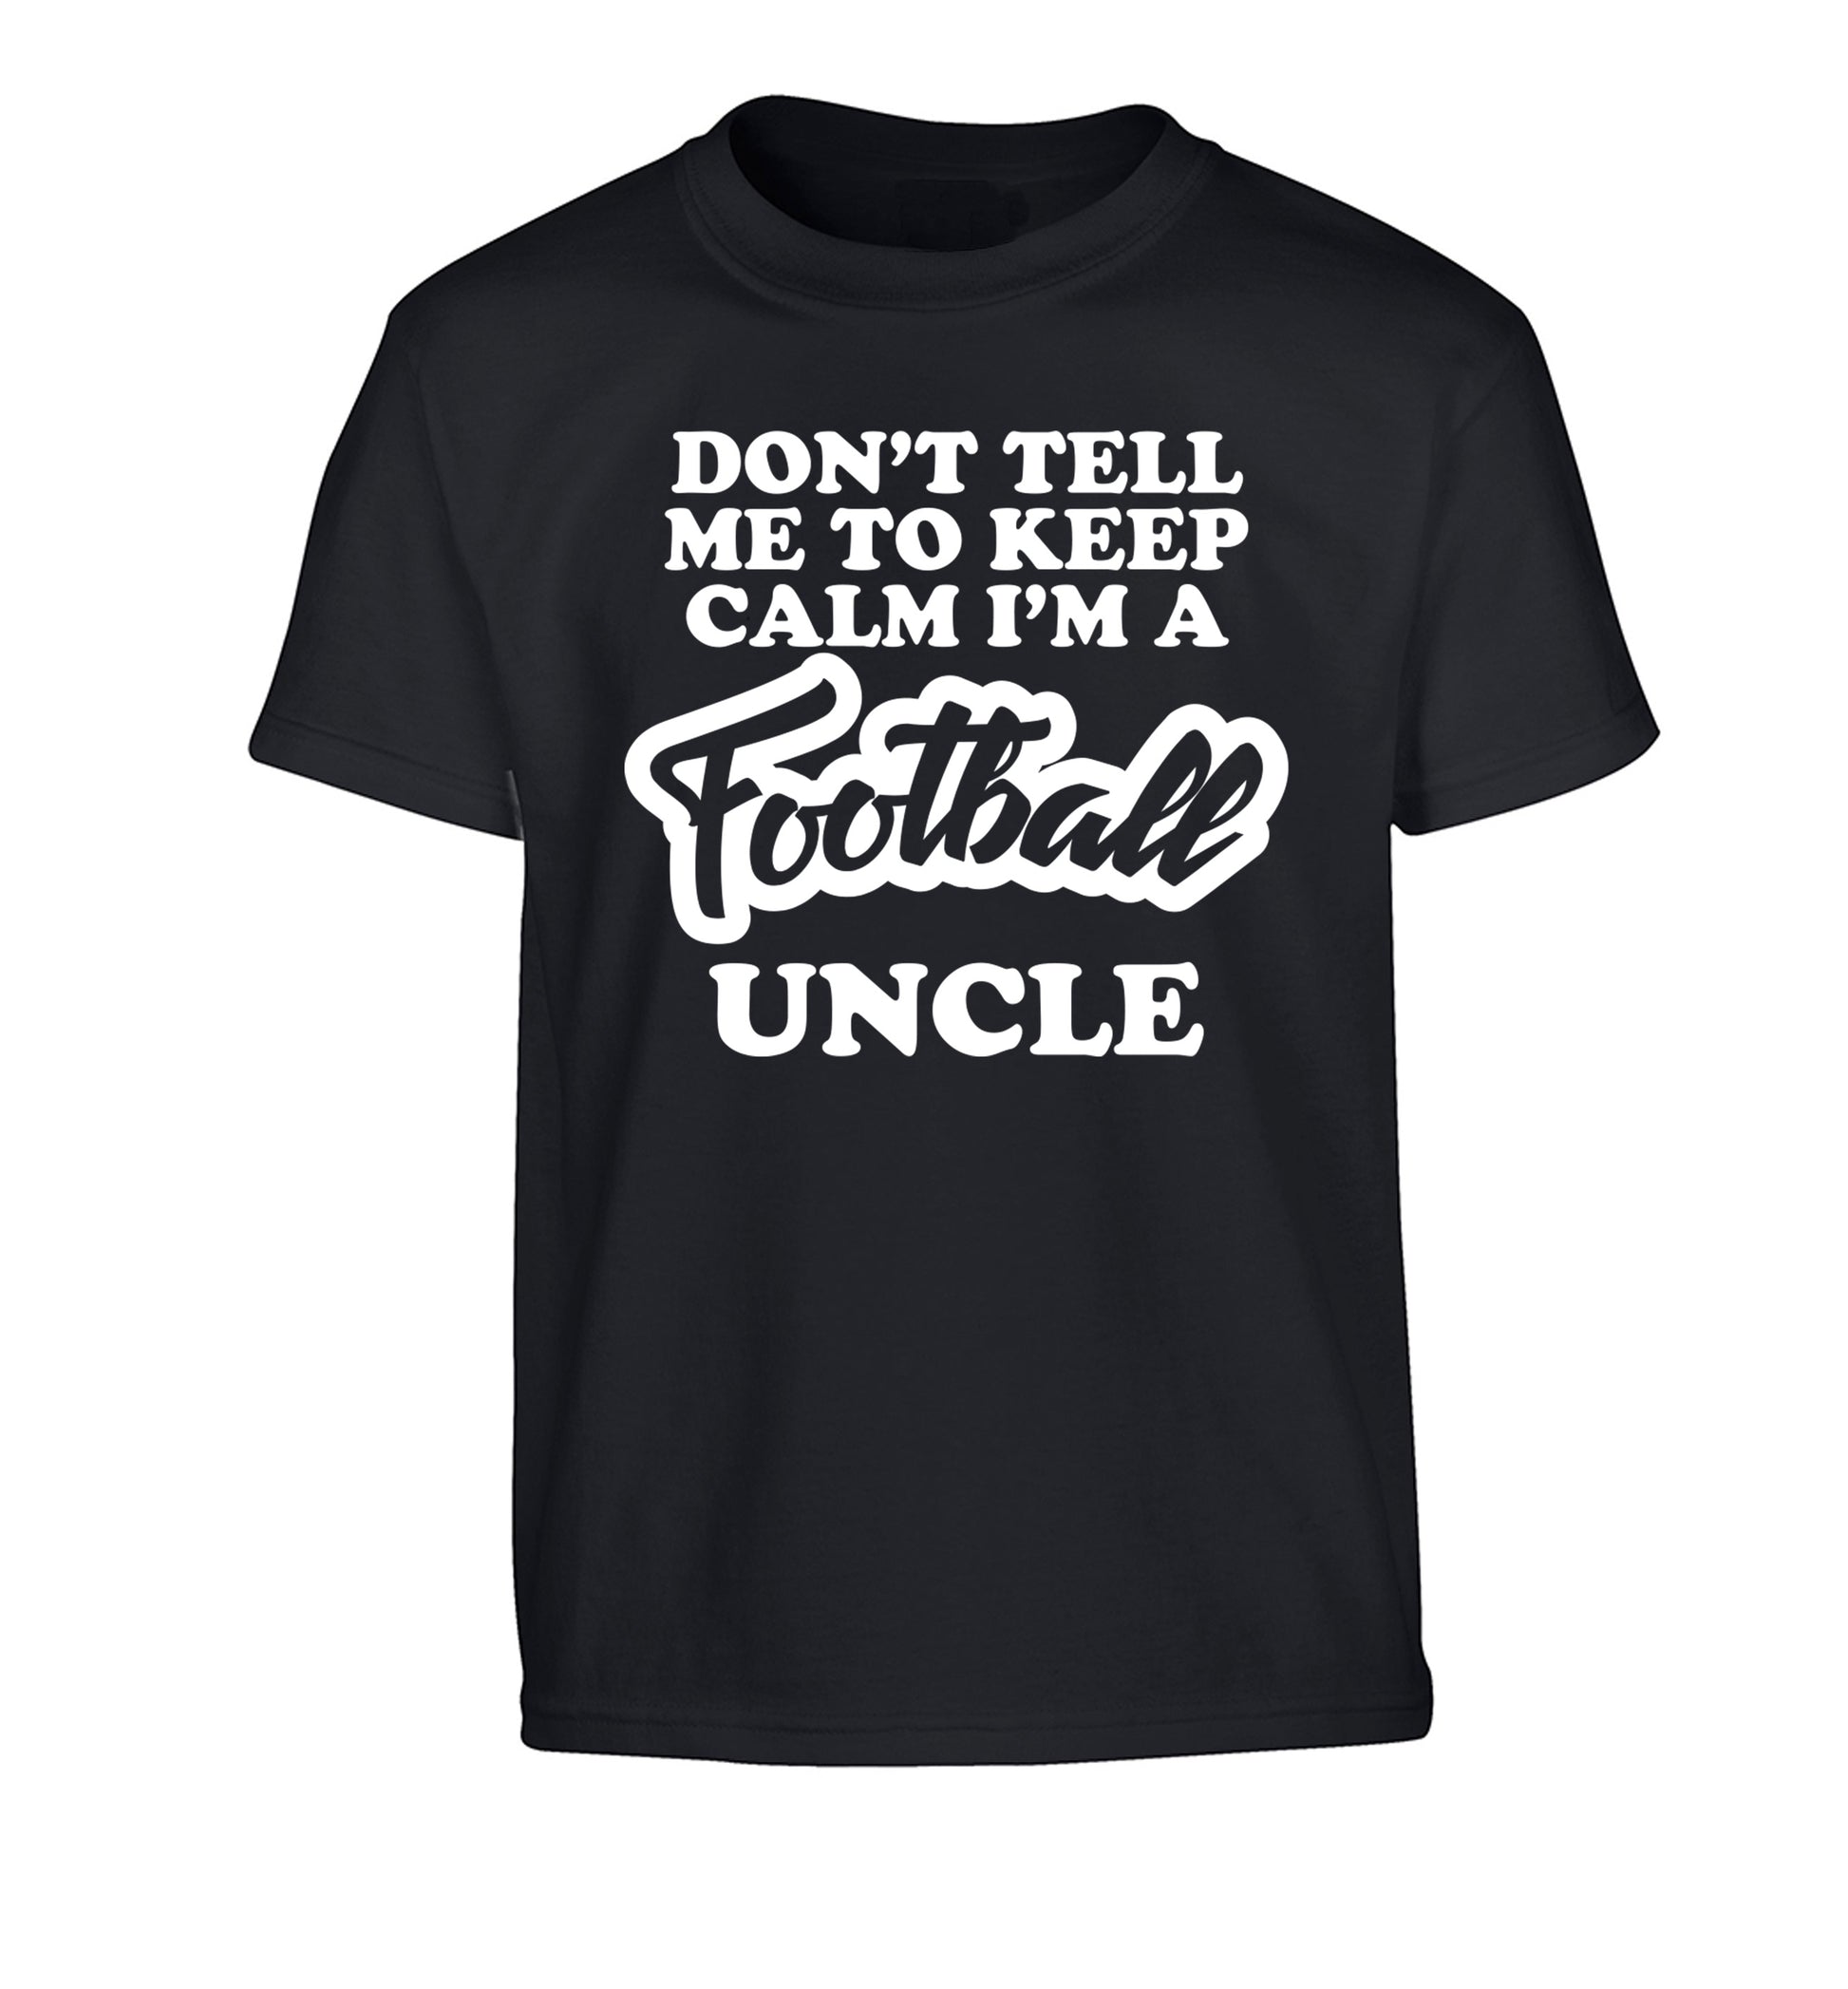 Worlds most amazing football uncle Children's black Tshirt 12-14 Years